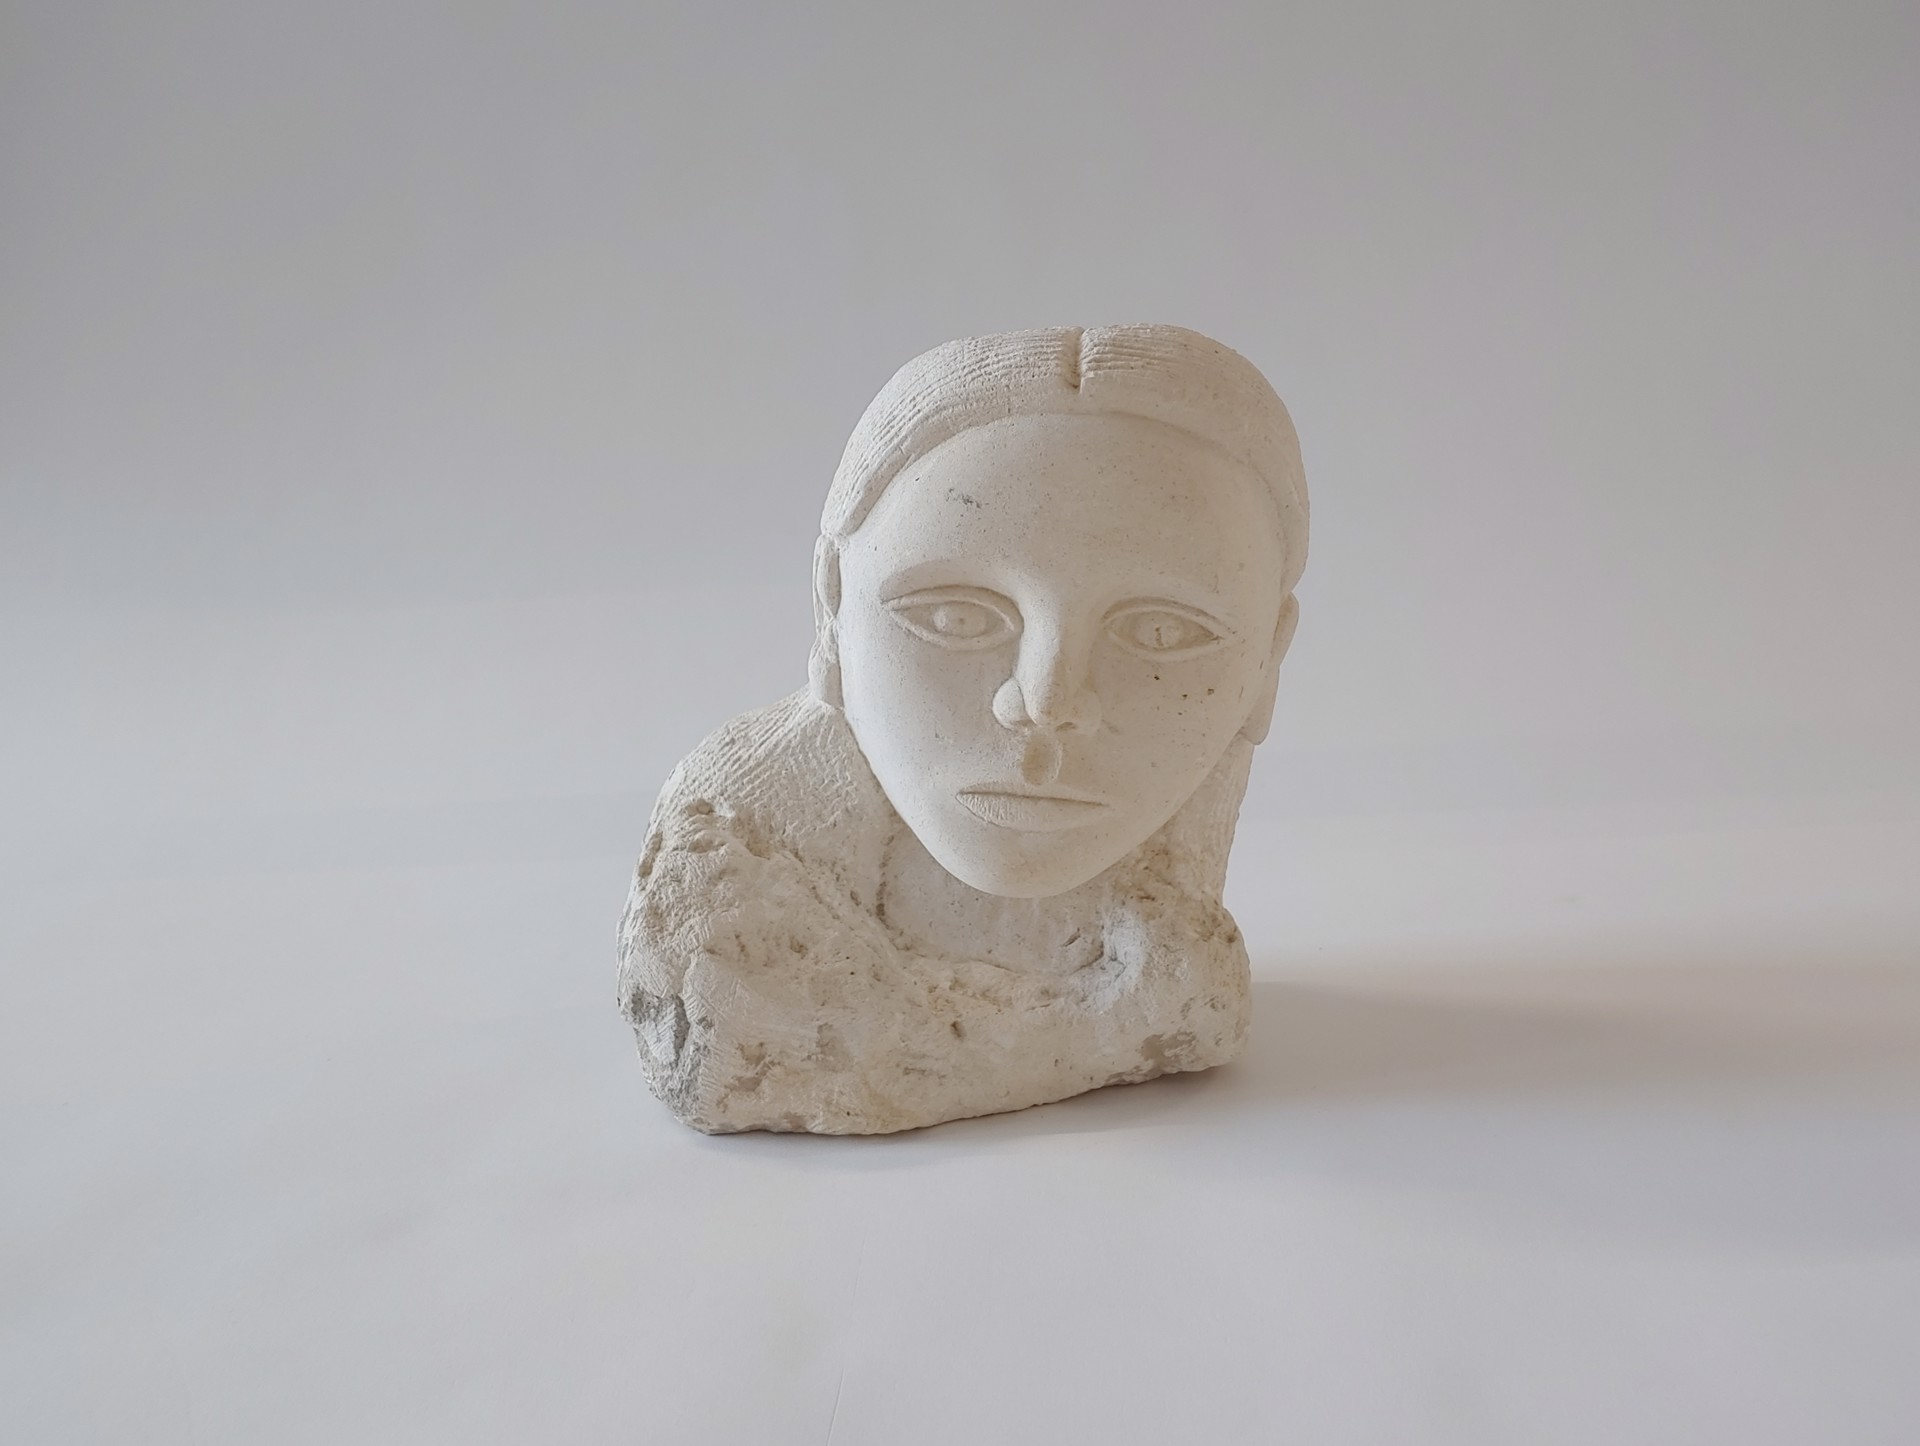 Woman's Stone Bust #2 - Stone Sculpture by David Amdur